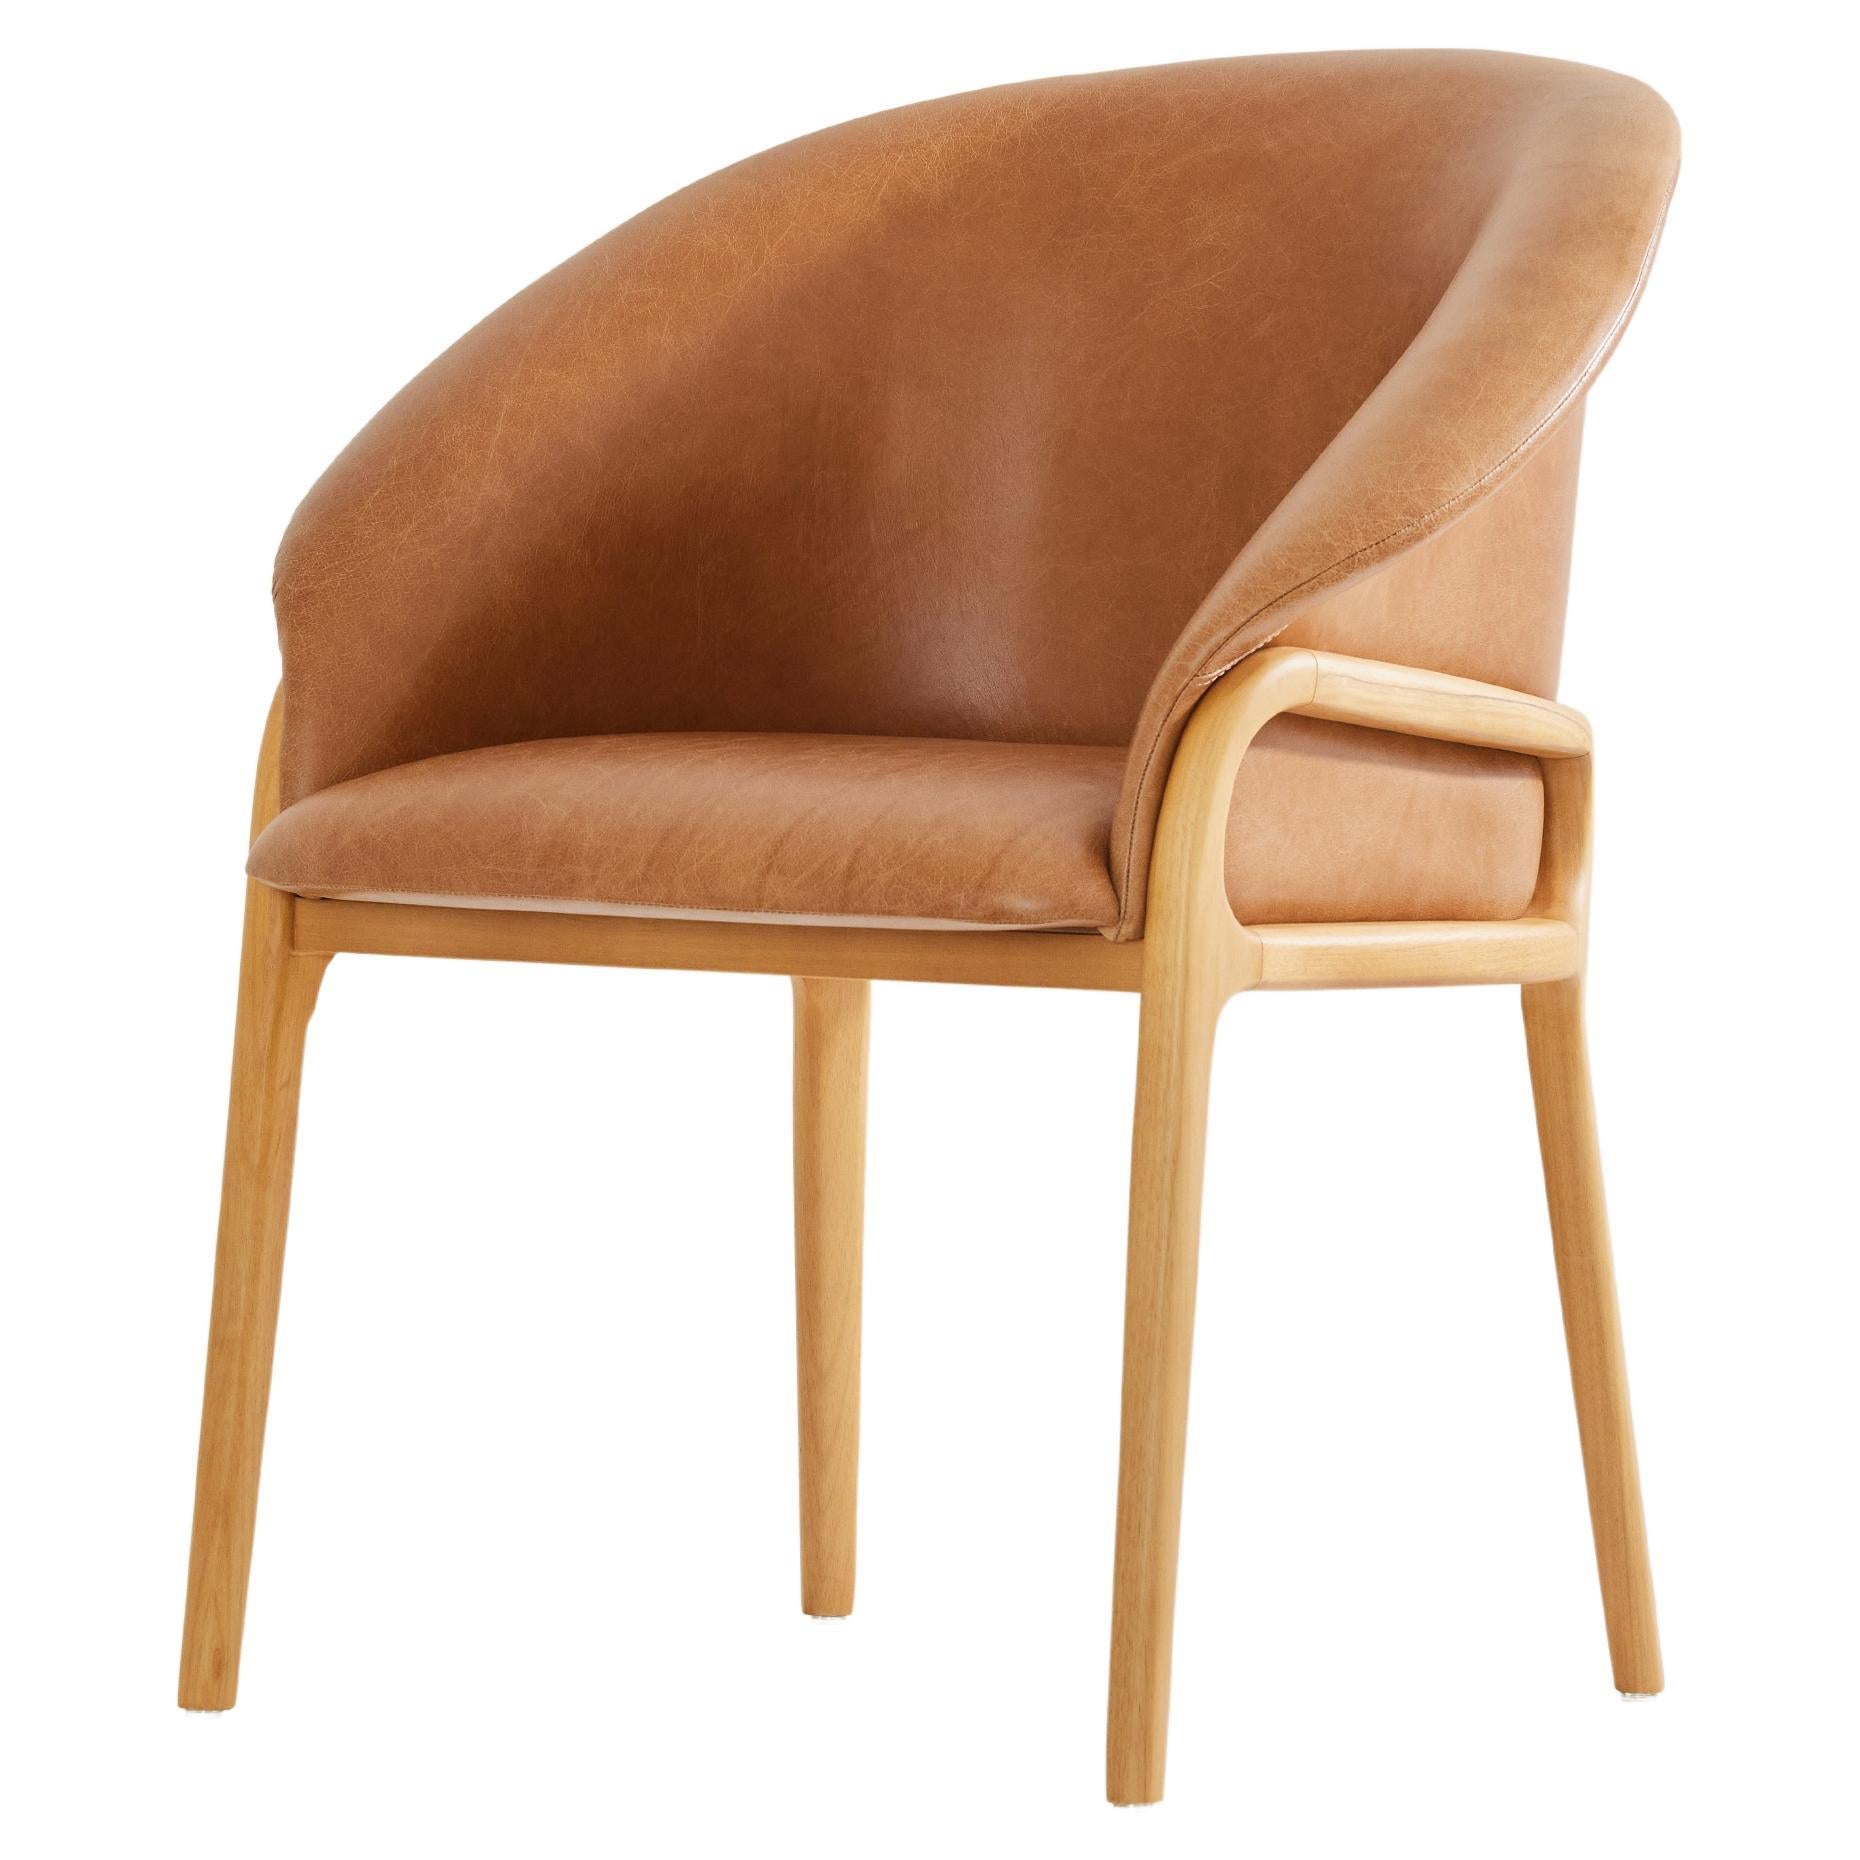 Minimalist Organic Chair in Solid Wood, camel leather Seating tone